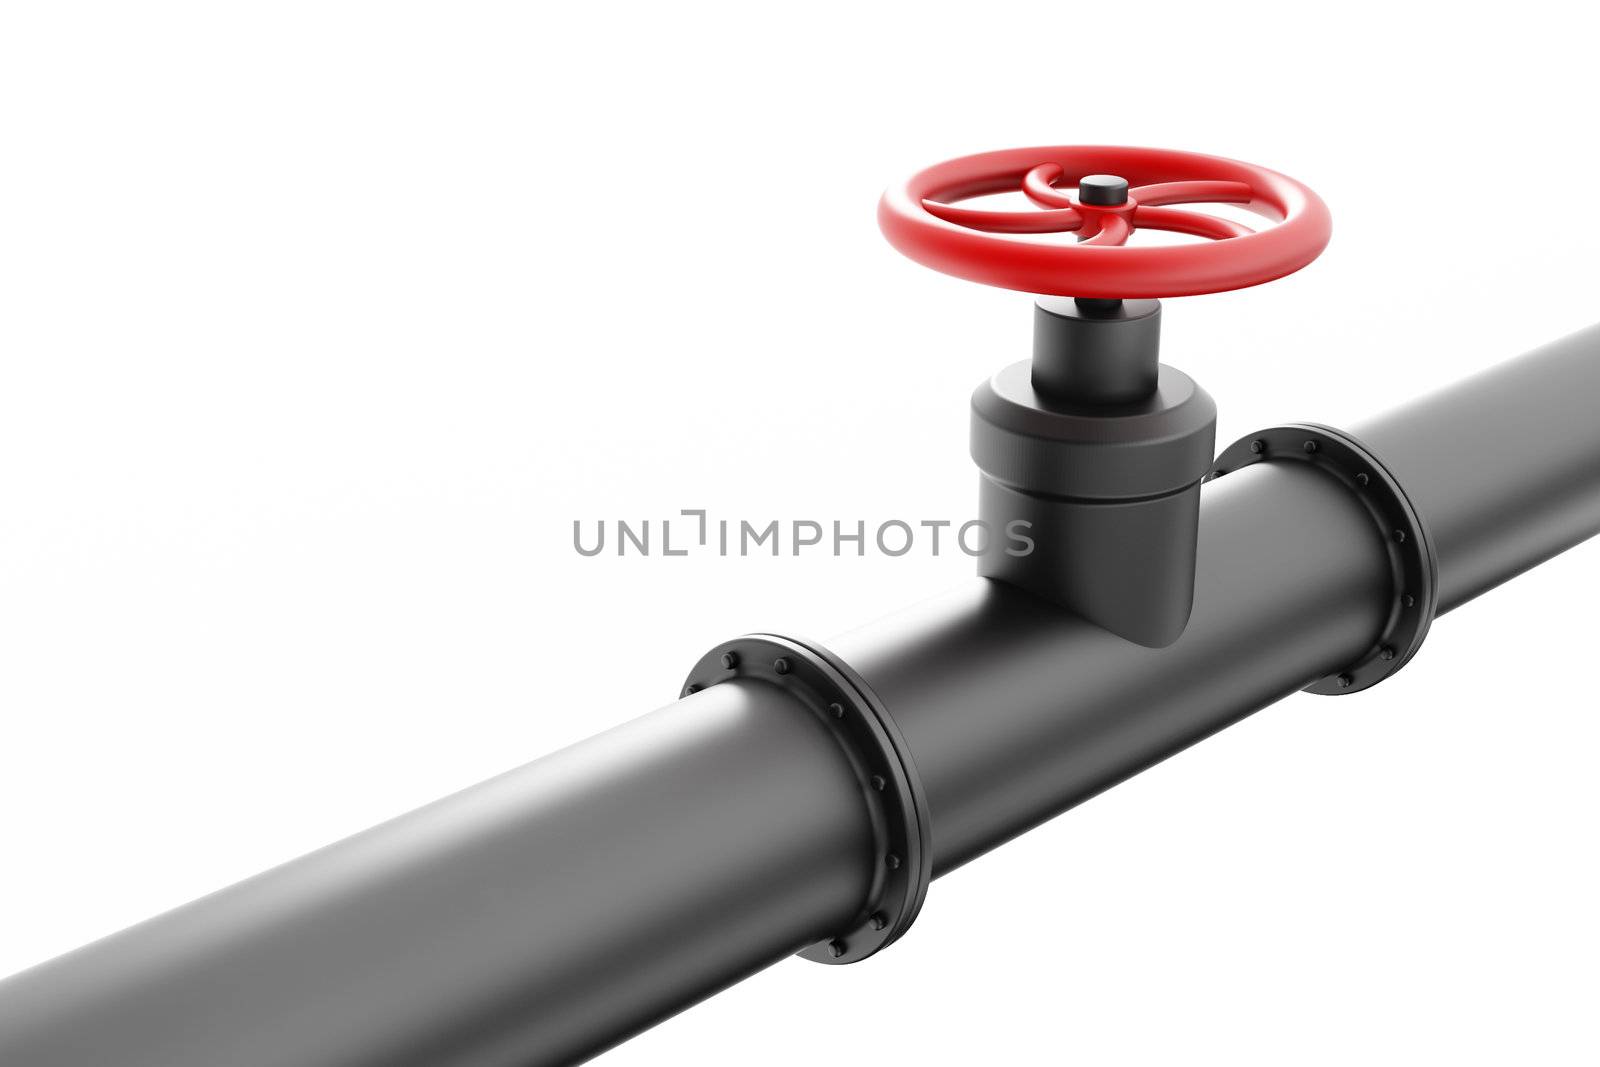 Black oil pipe with red valve, isolated on white background